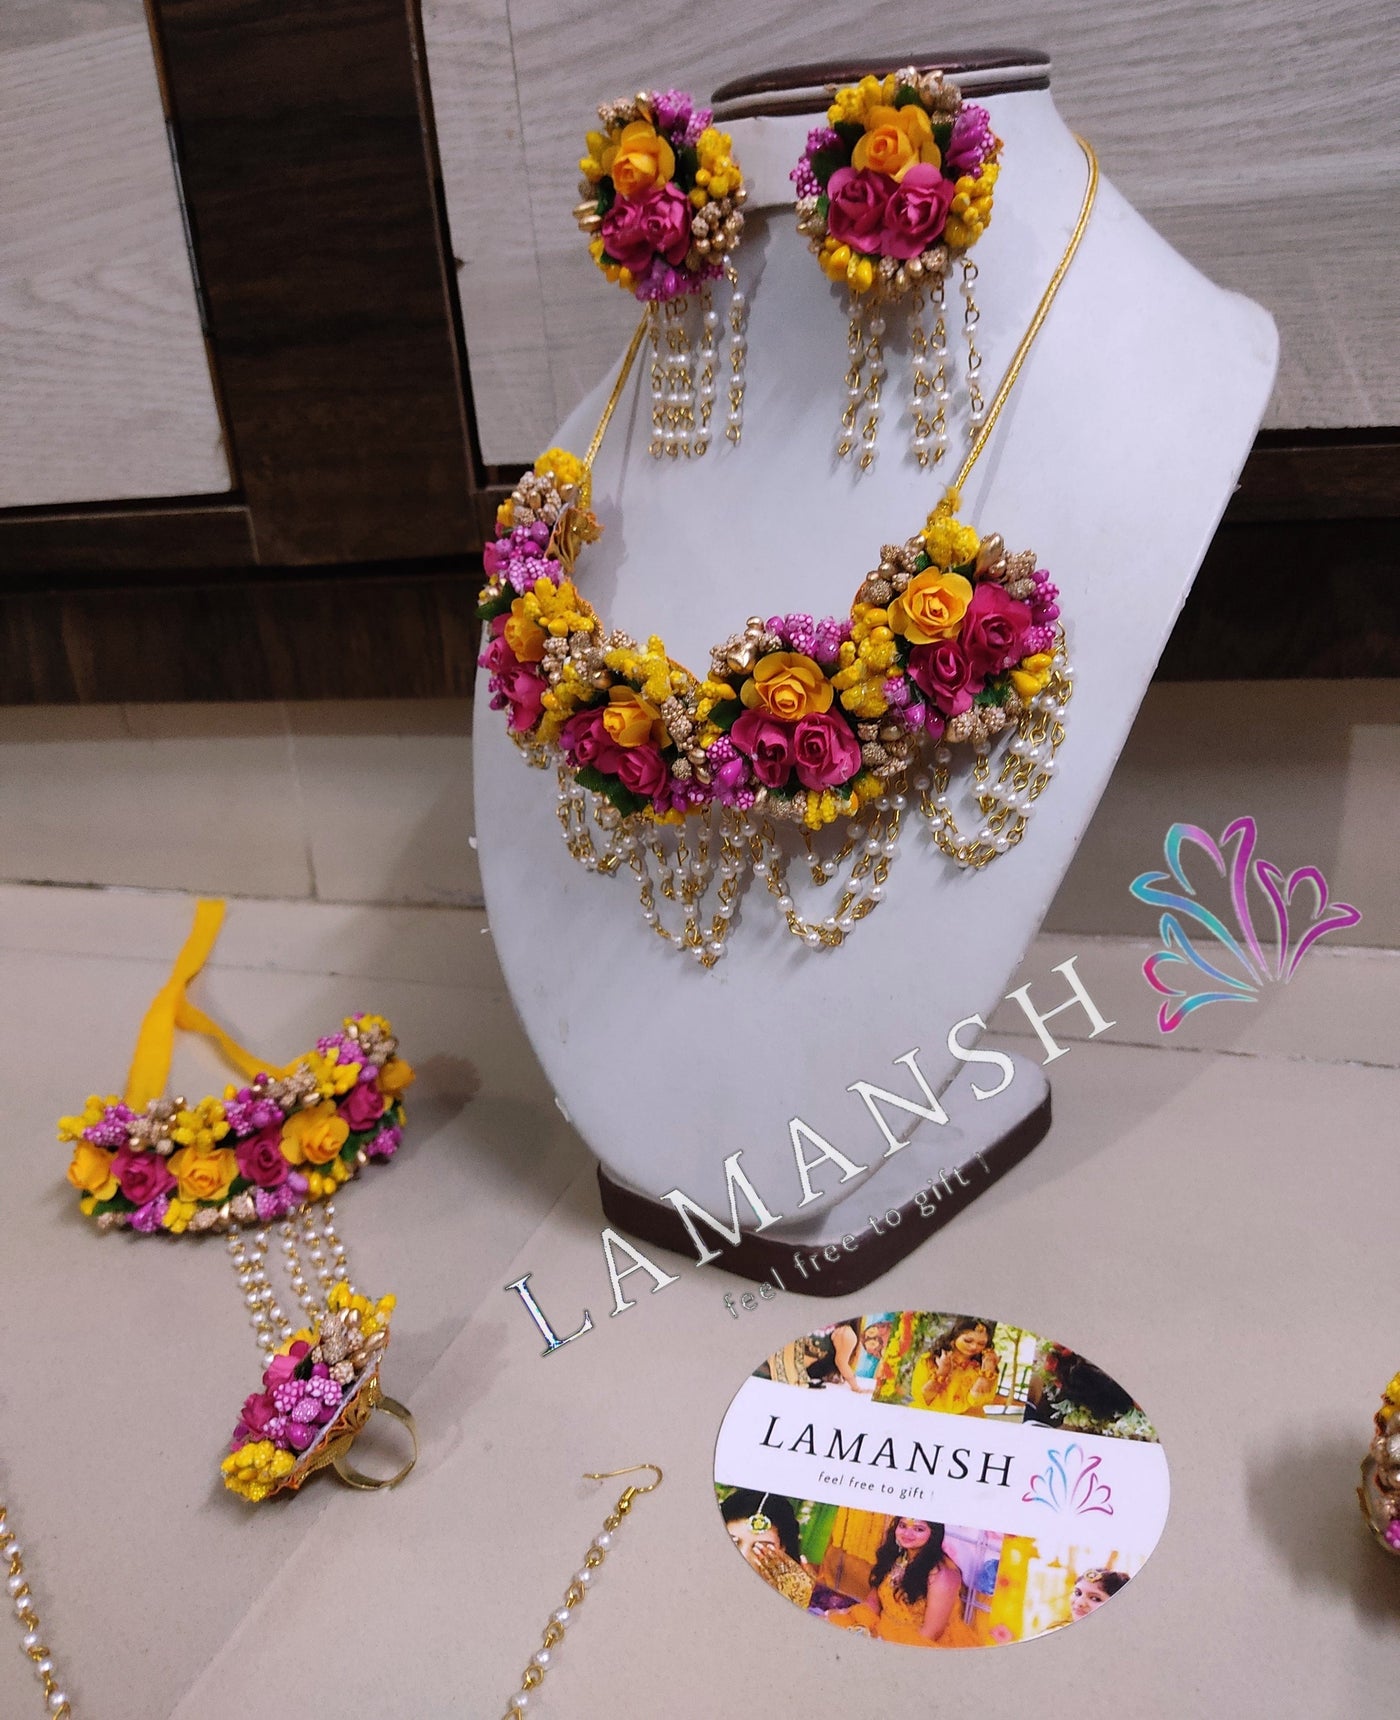 Lamansh Flower 🌺 Jewellery 1 Necklace, 2 Earrings ,1 Maangtika with side chain & 2 Bracelets Attached with Ring set / Pink-Yellow-Golden LAMANSH® Bridal 💛 Yellow-Pink-Golden Artificial Flower Jewellery set for Haldi ceremony